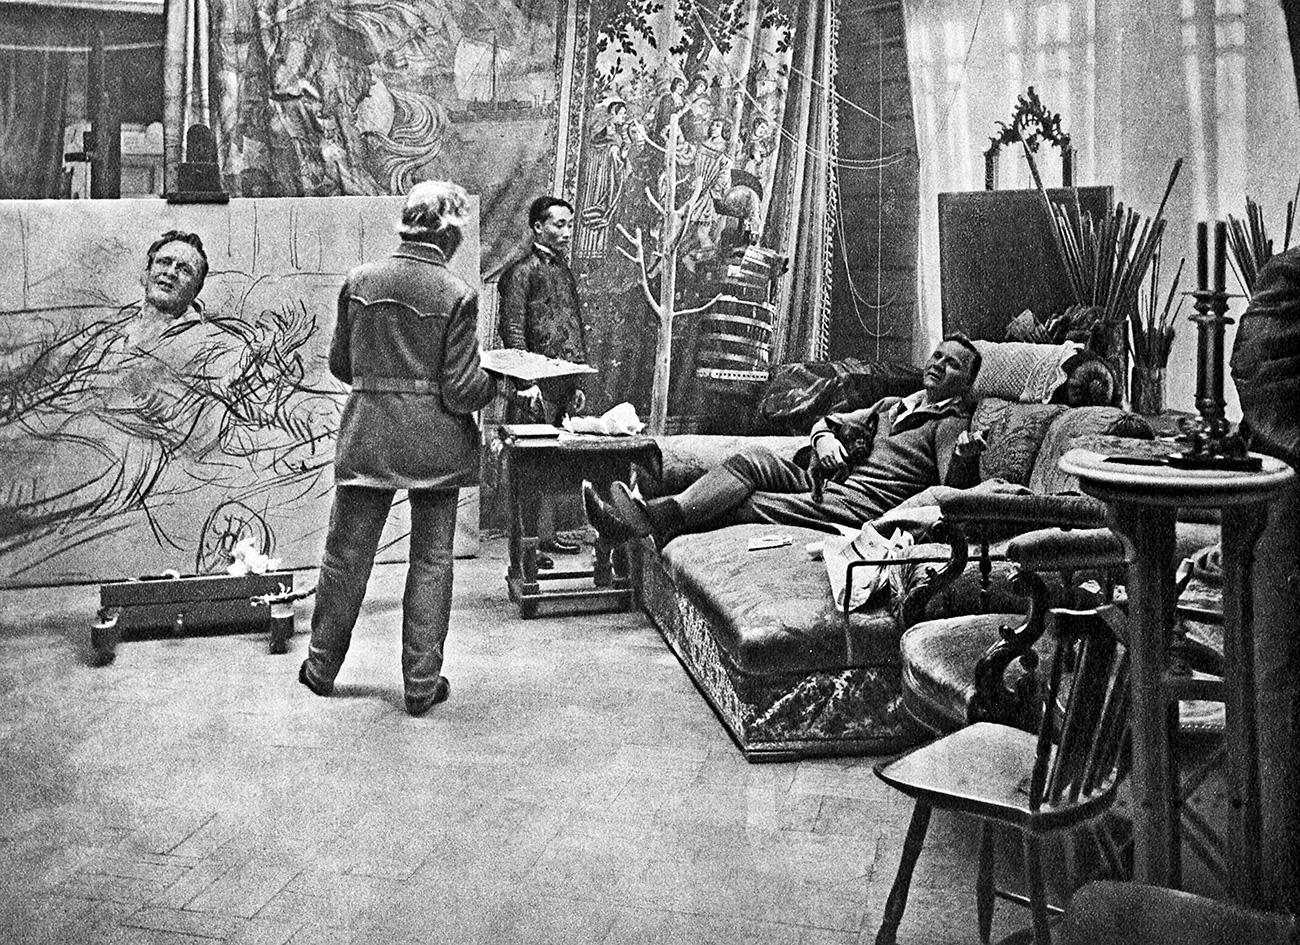  For more than a decade, Bulla worked in his own studio at 54 Nevsky Prospect, which still exists to this day. Poets Vladimir Mayakovsky and Sergei Yesenin, famous writer Maxim Gorky and singer Fyodor Chaliapin were all guests at Bulla's studio. // Artist Ilya Repin painting a portrait of Fyodor Chaliapin in his studio, February-March 1914.